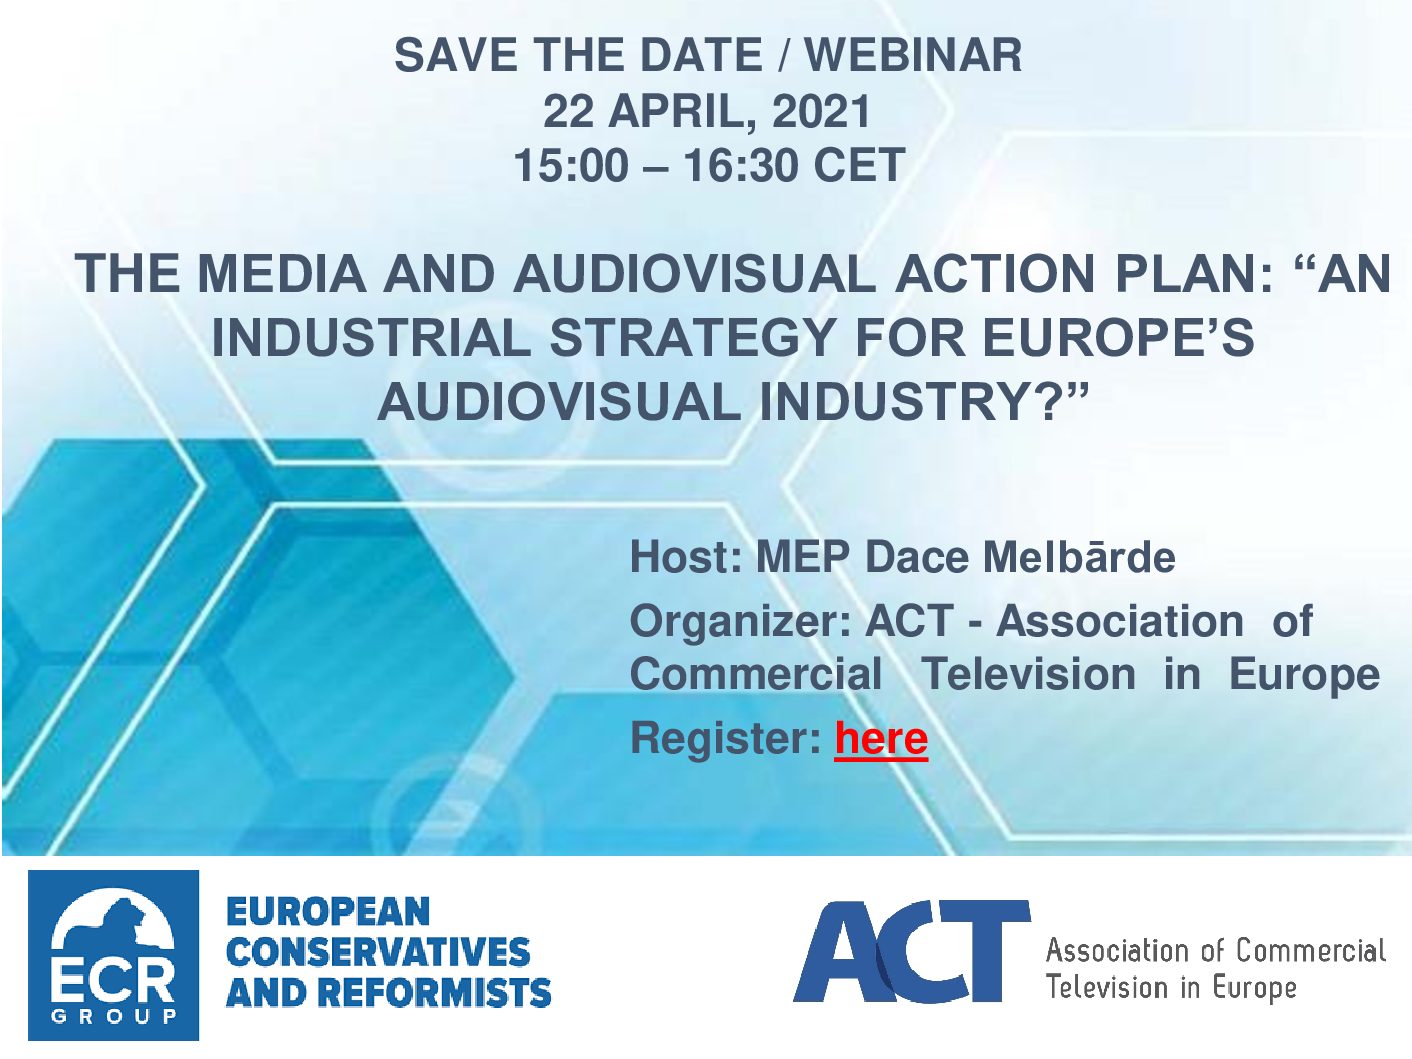 On 22 April 2021, ACT organised an online event on the Media and Audiovisual Action Plan: “An Industrial Strategy for Europe’s Audiovisual Industry?”